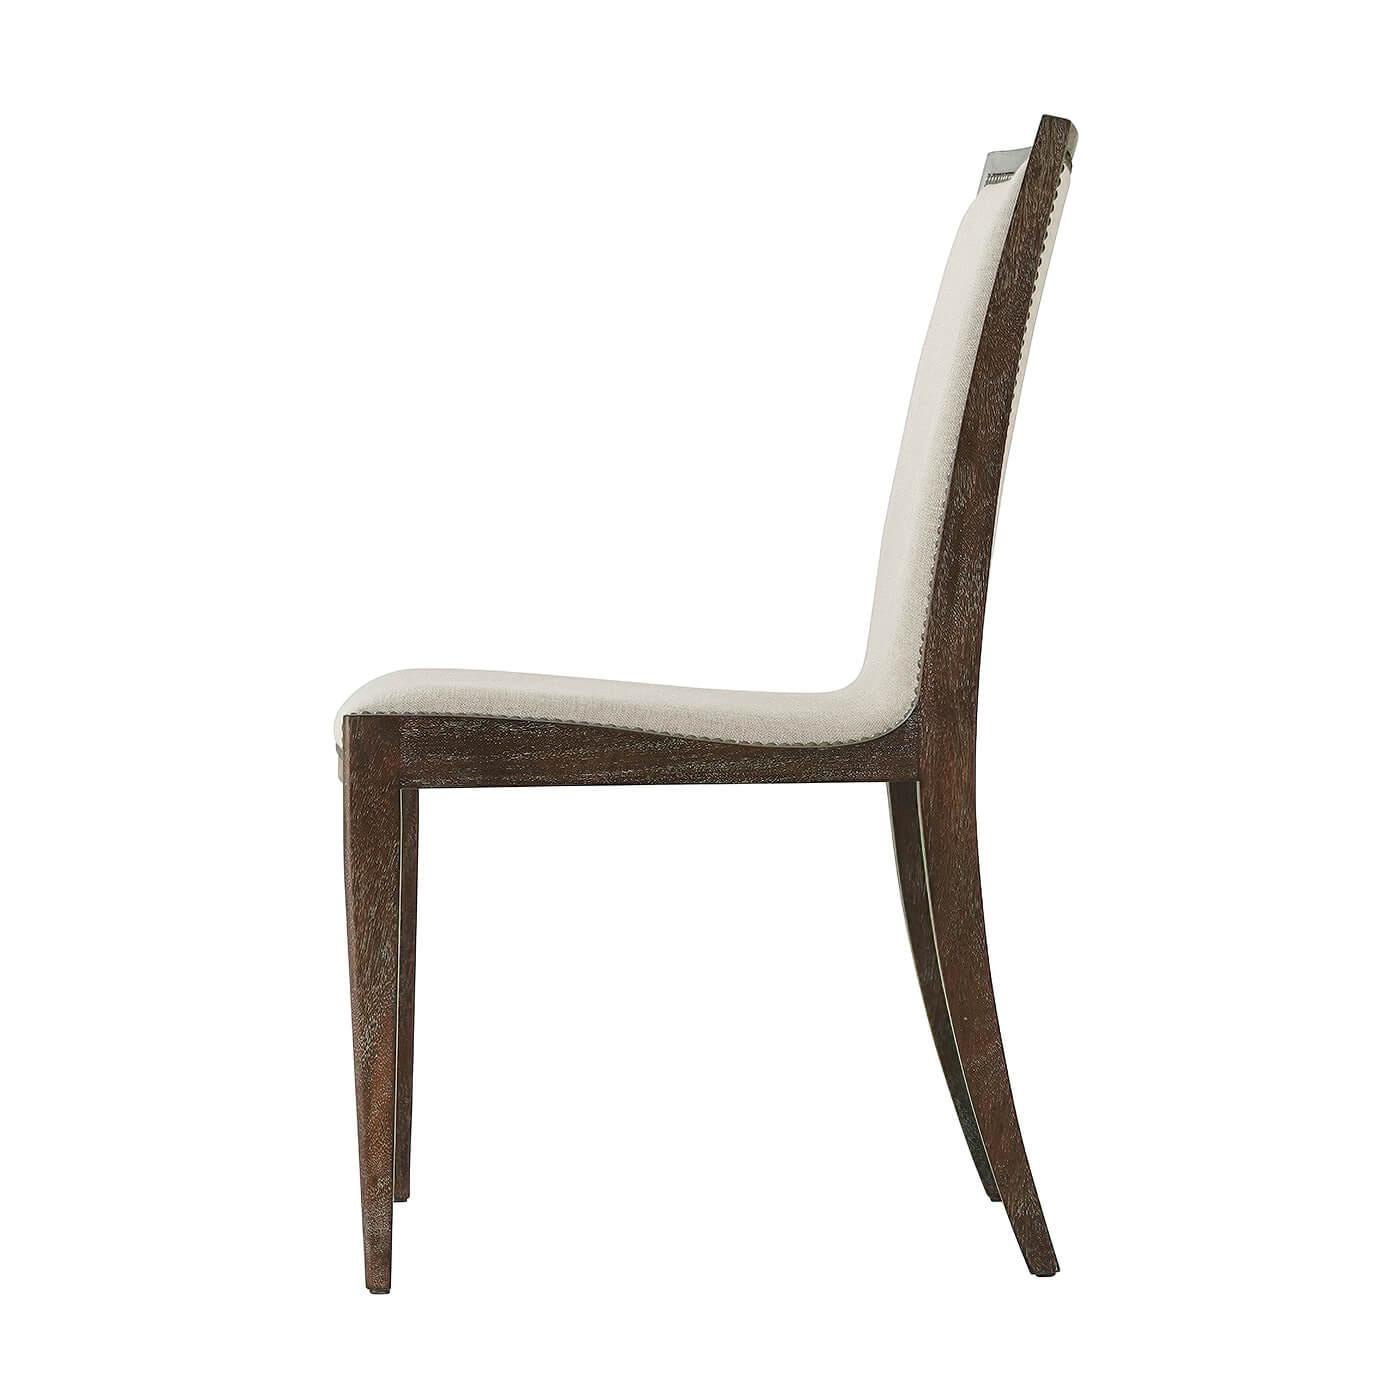 Mid-Century Modern style mahogany mesquite finish dining side chair with a slung upholstered seat and back, iin cream hide leather and oatmeal linen, finished with antiqued steel nail head trim.
Each Hide has natural variations
Dimensions: 22